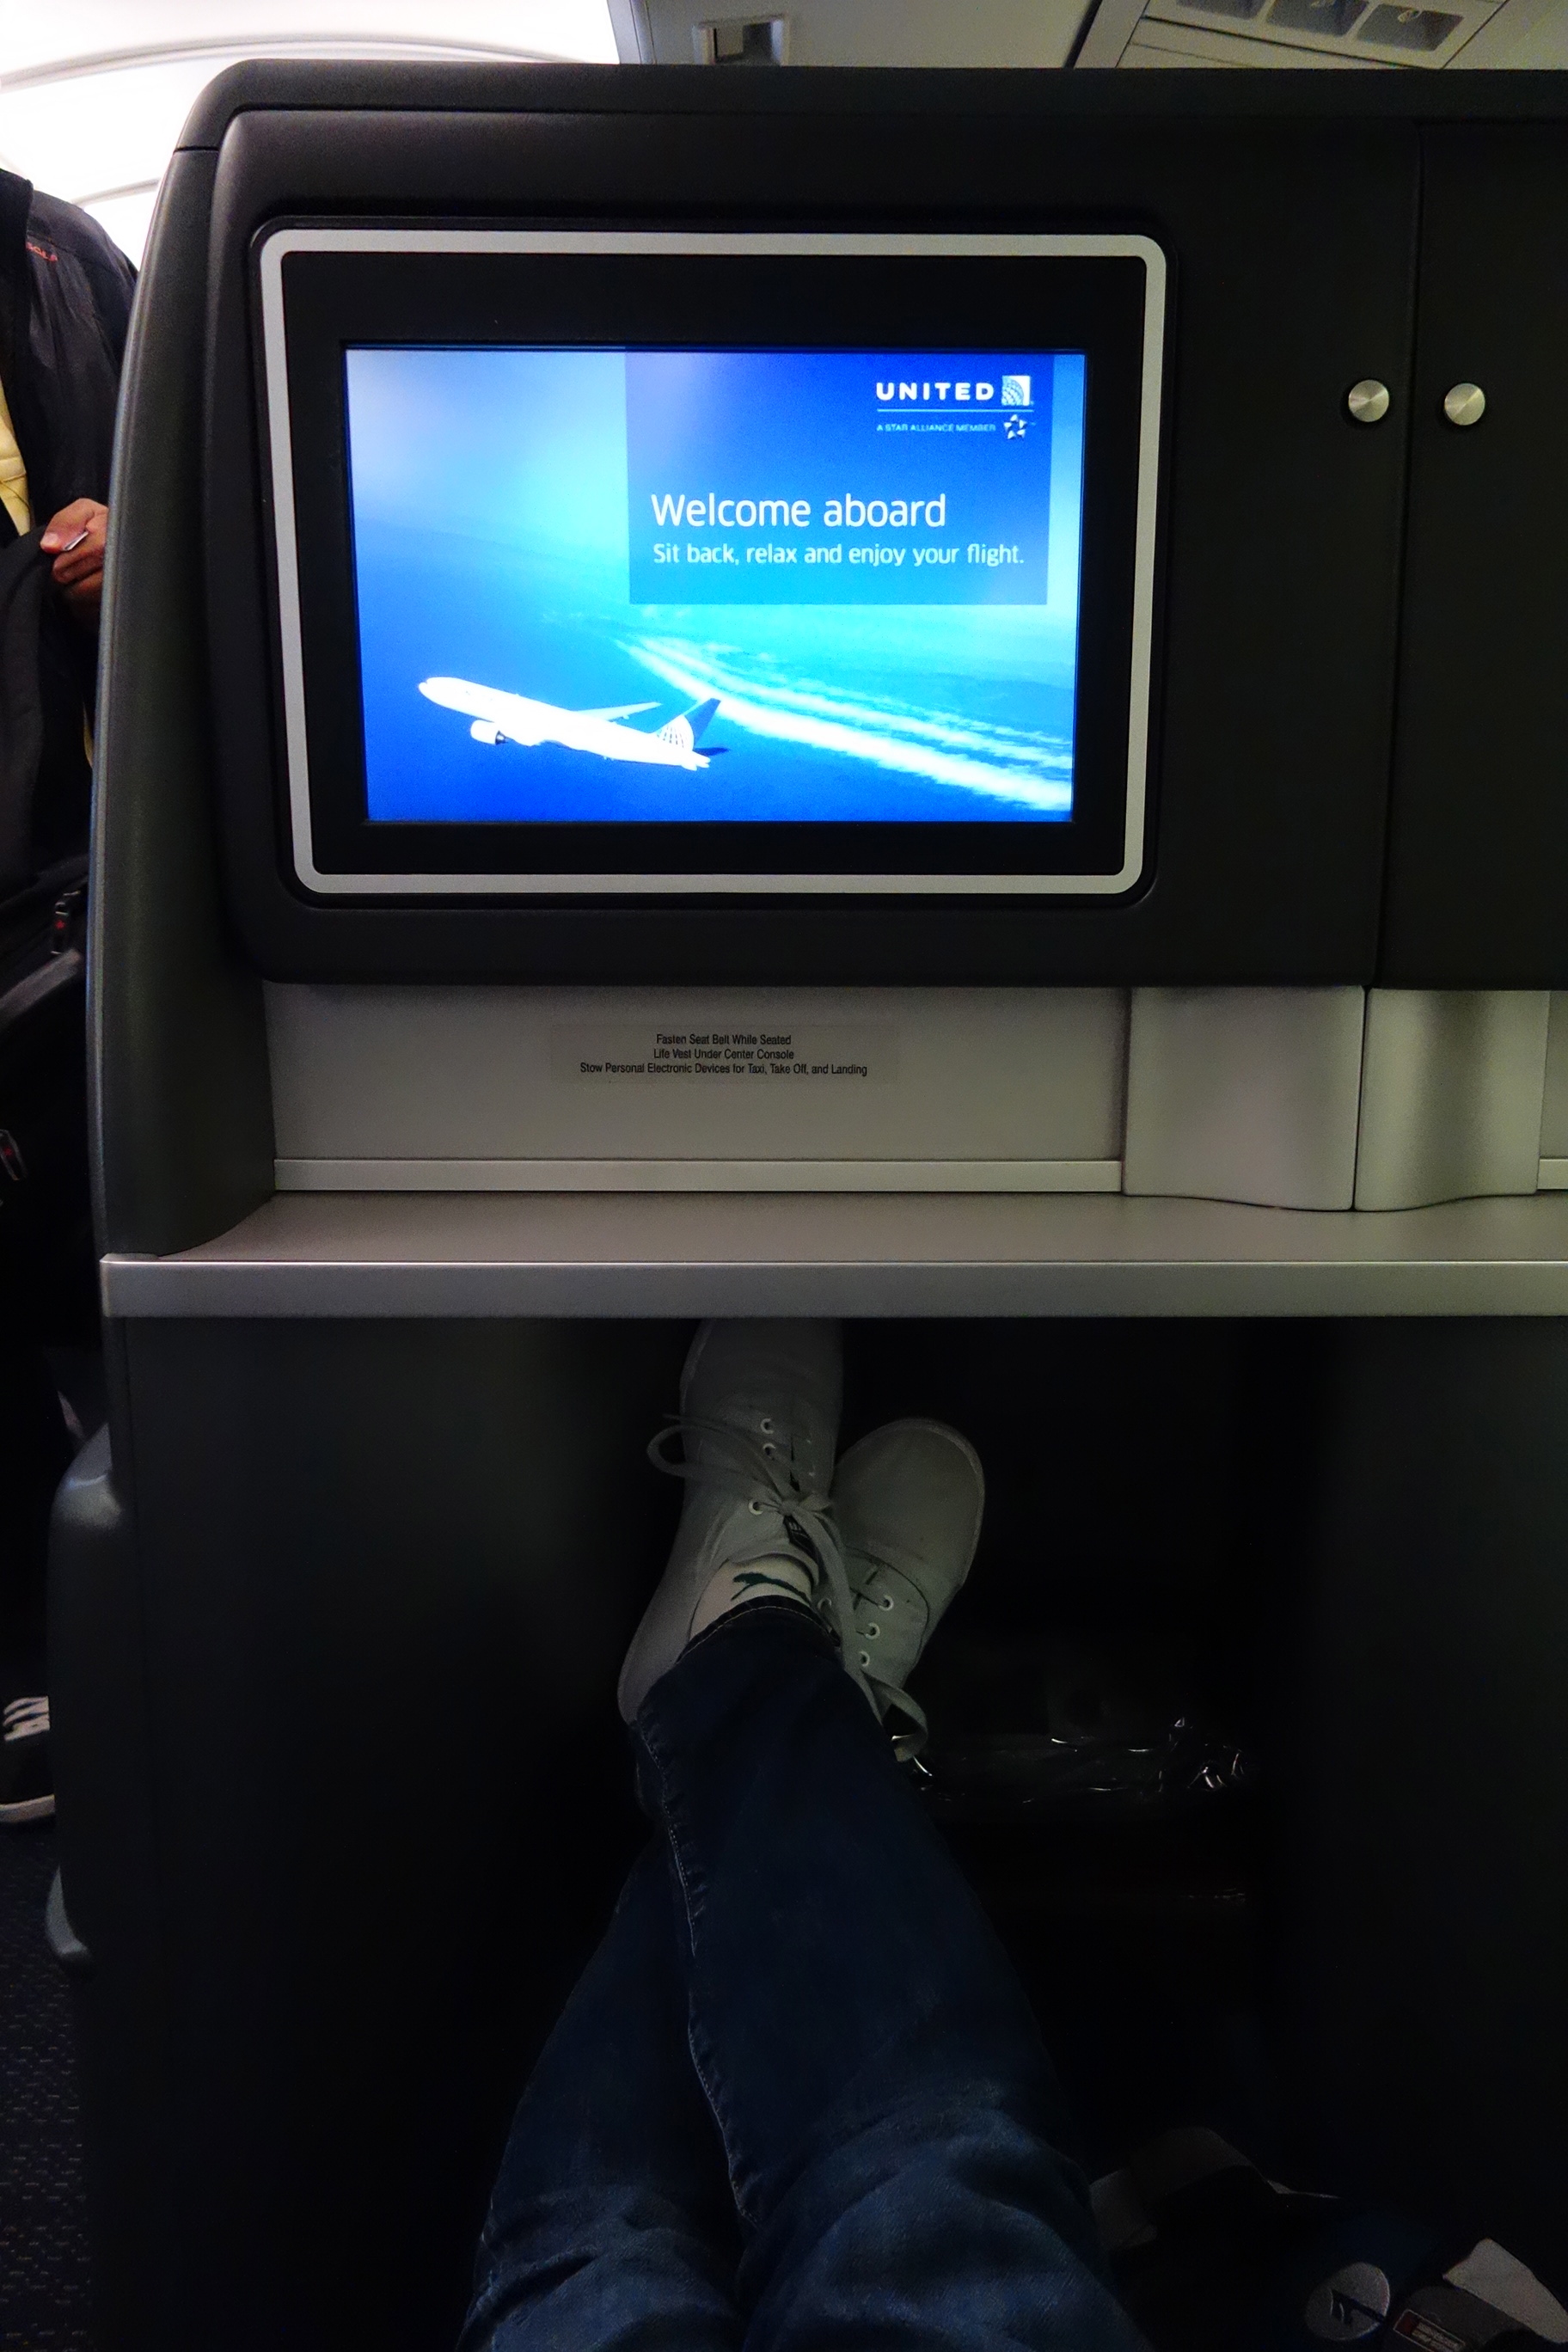 Ample leg room and large entertainment screen